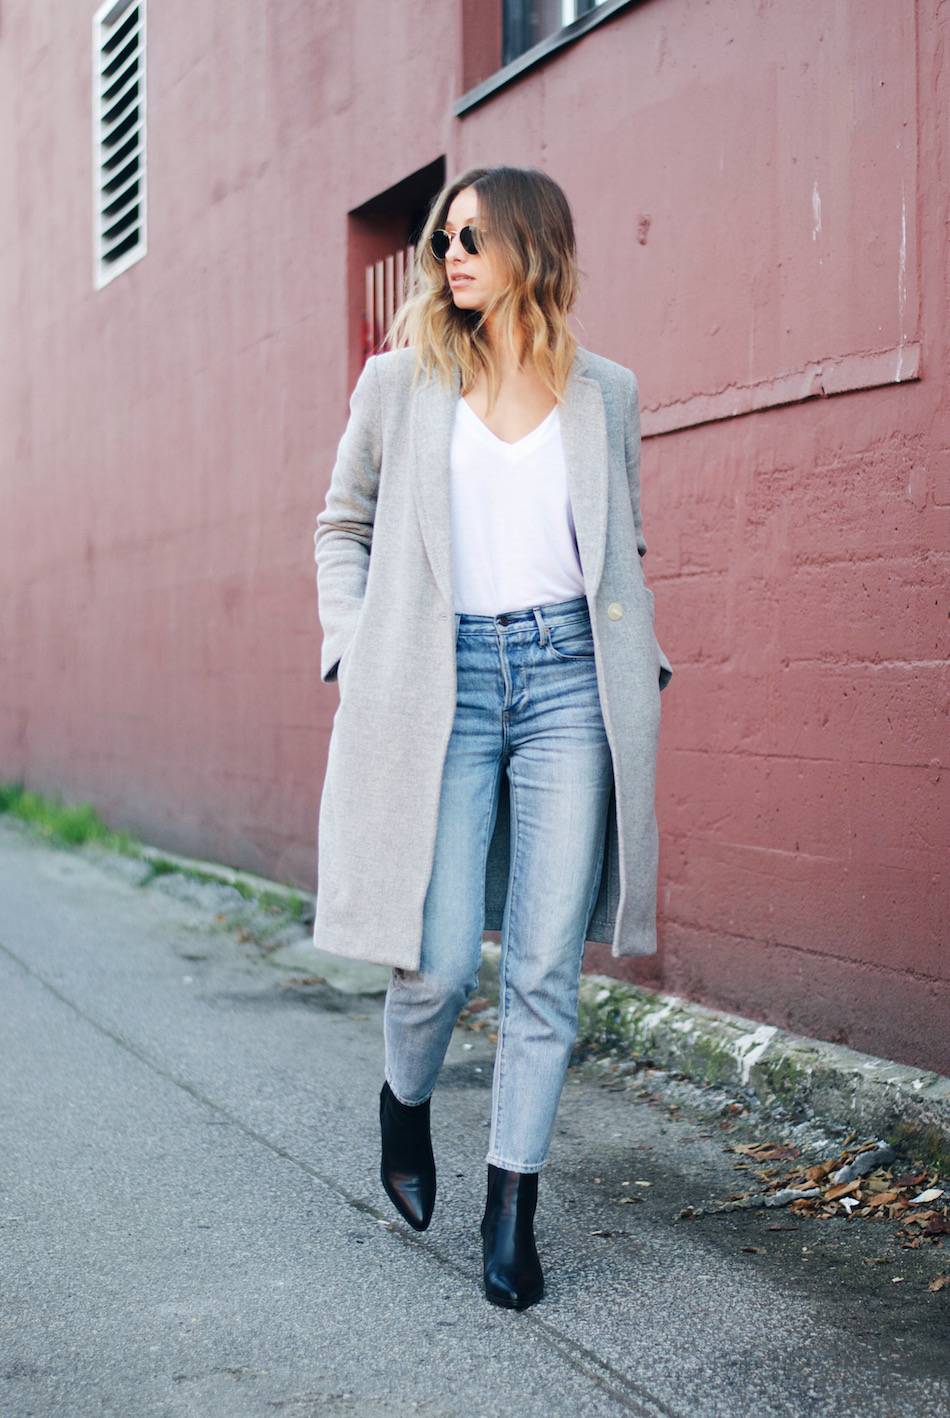 The Chic Way to Style Your Basics for Winter